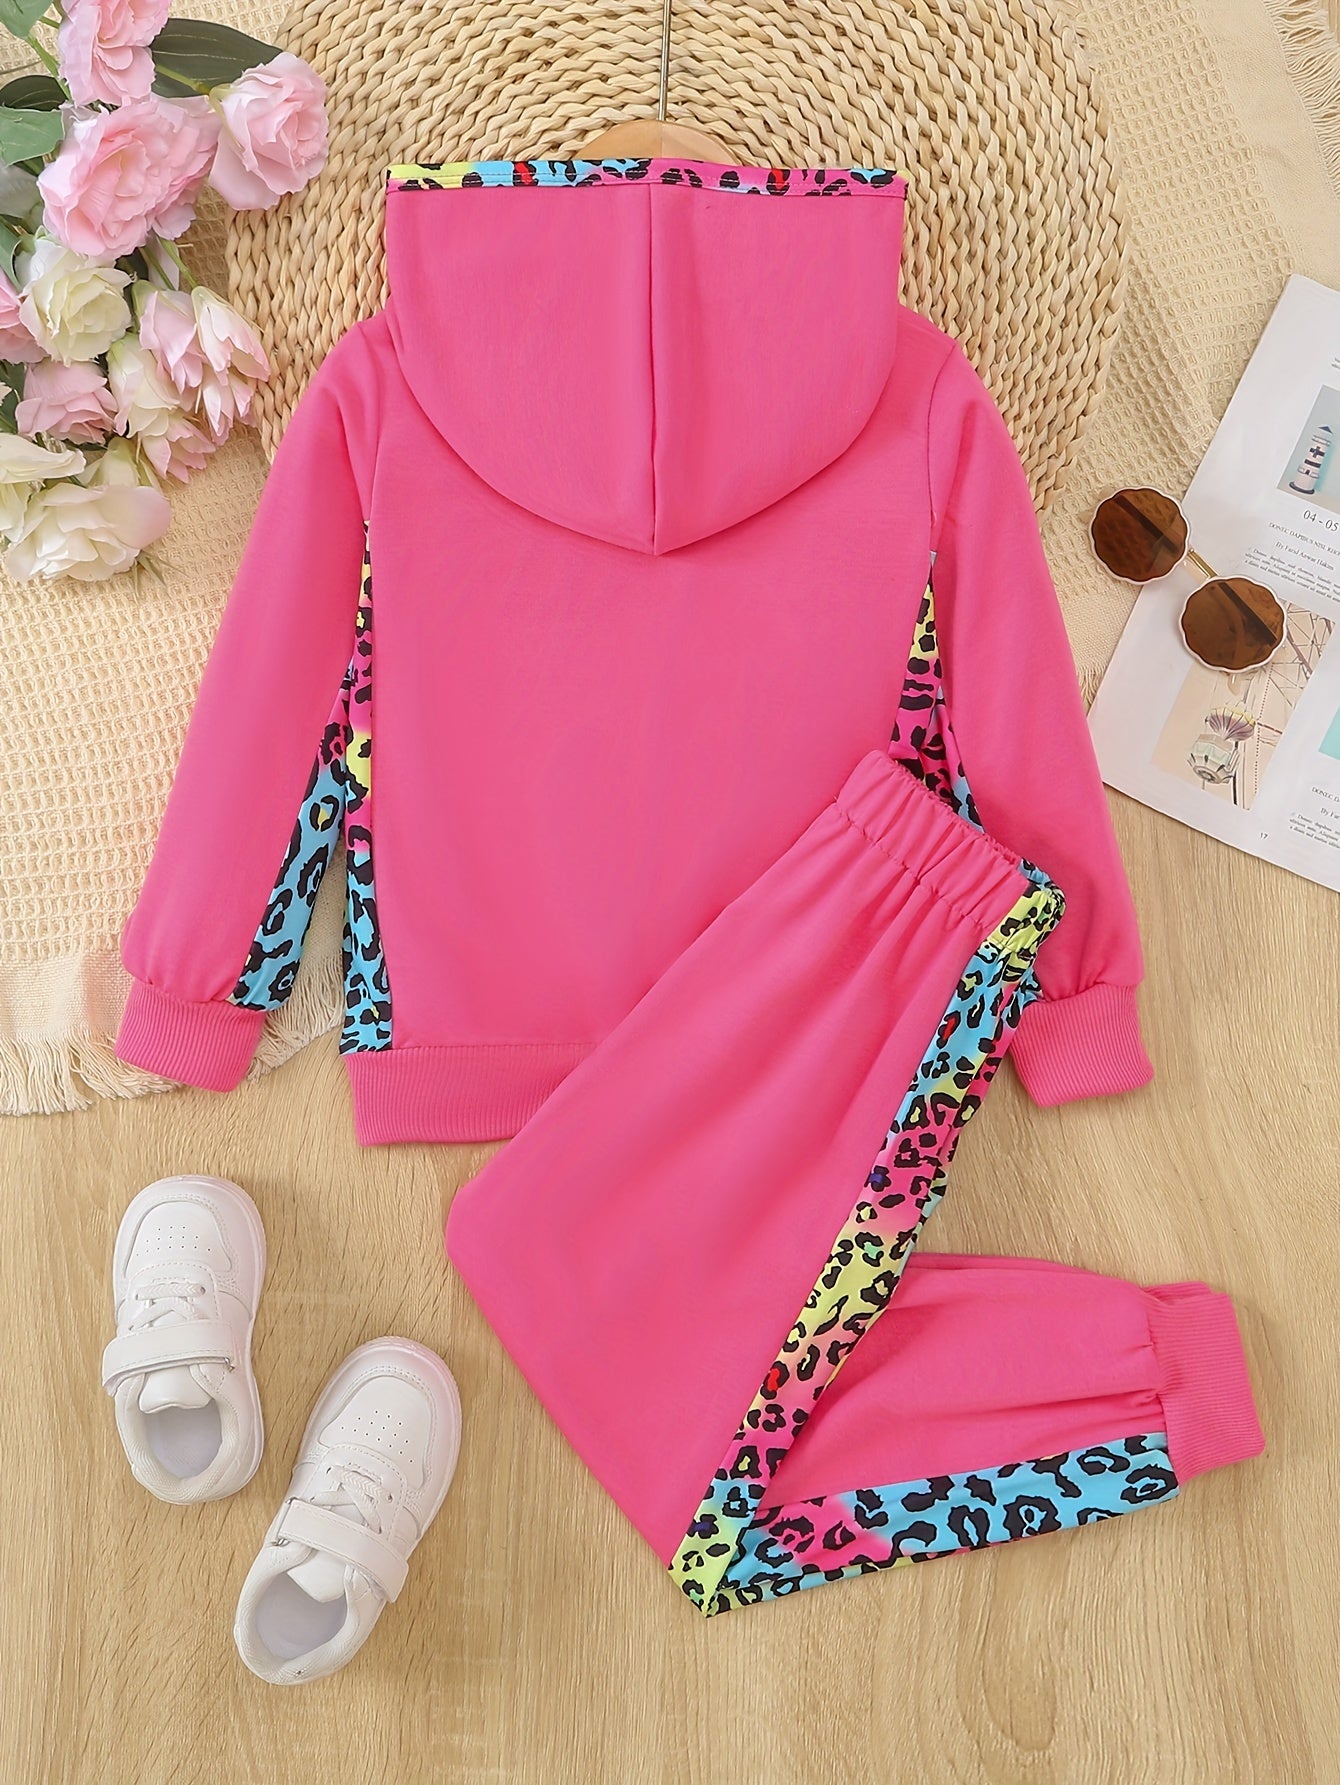 Leopard Pattern Toddler Girl's 2pcs, Hoodie & Sweatpants Set, MAMA'S BESTIE Print Casual Outfits, Kids Clothes For Spring Fall